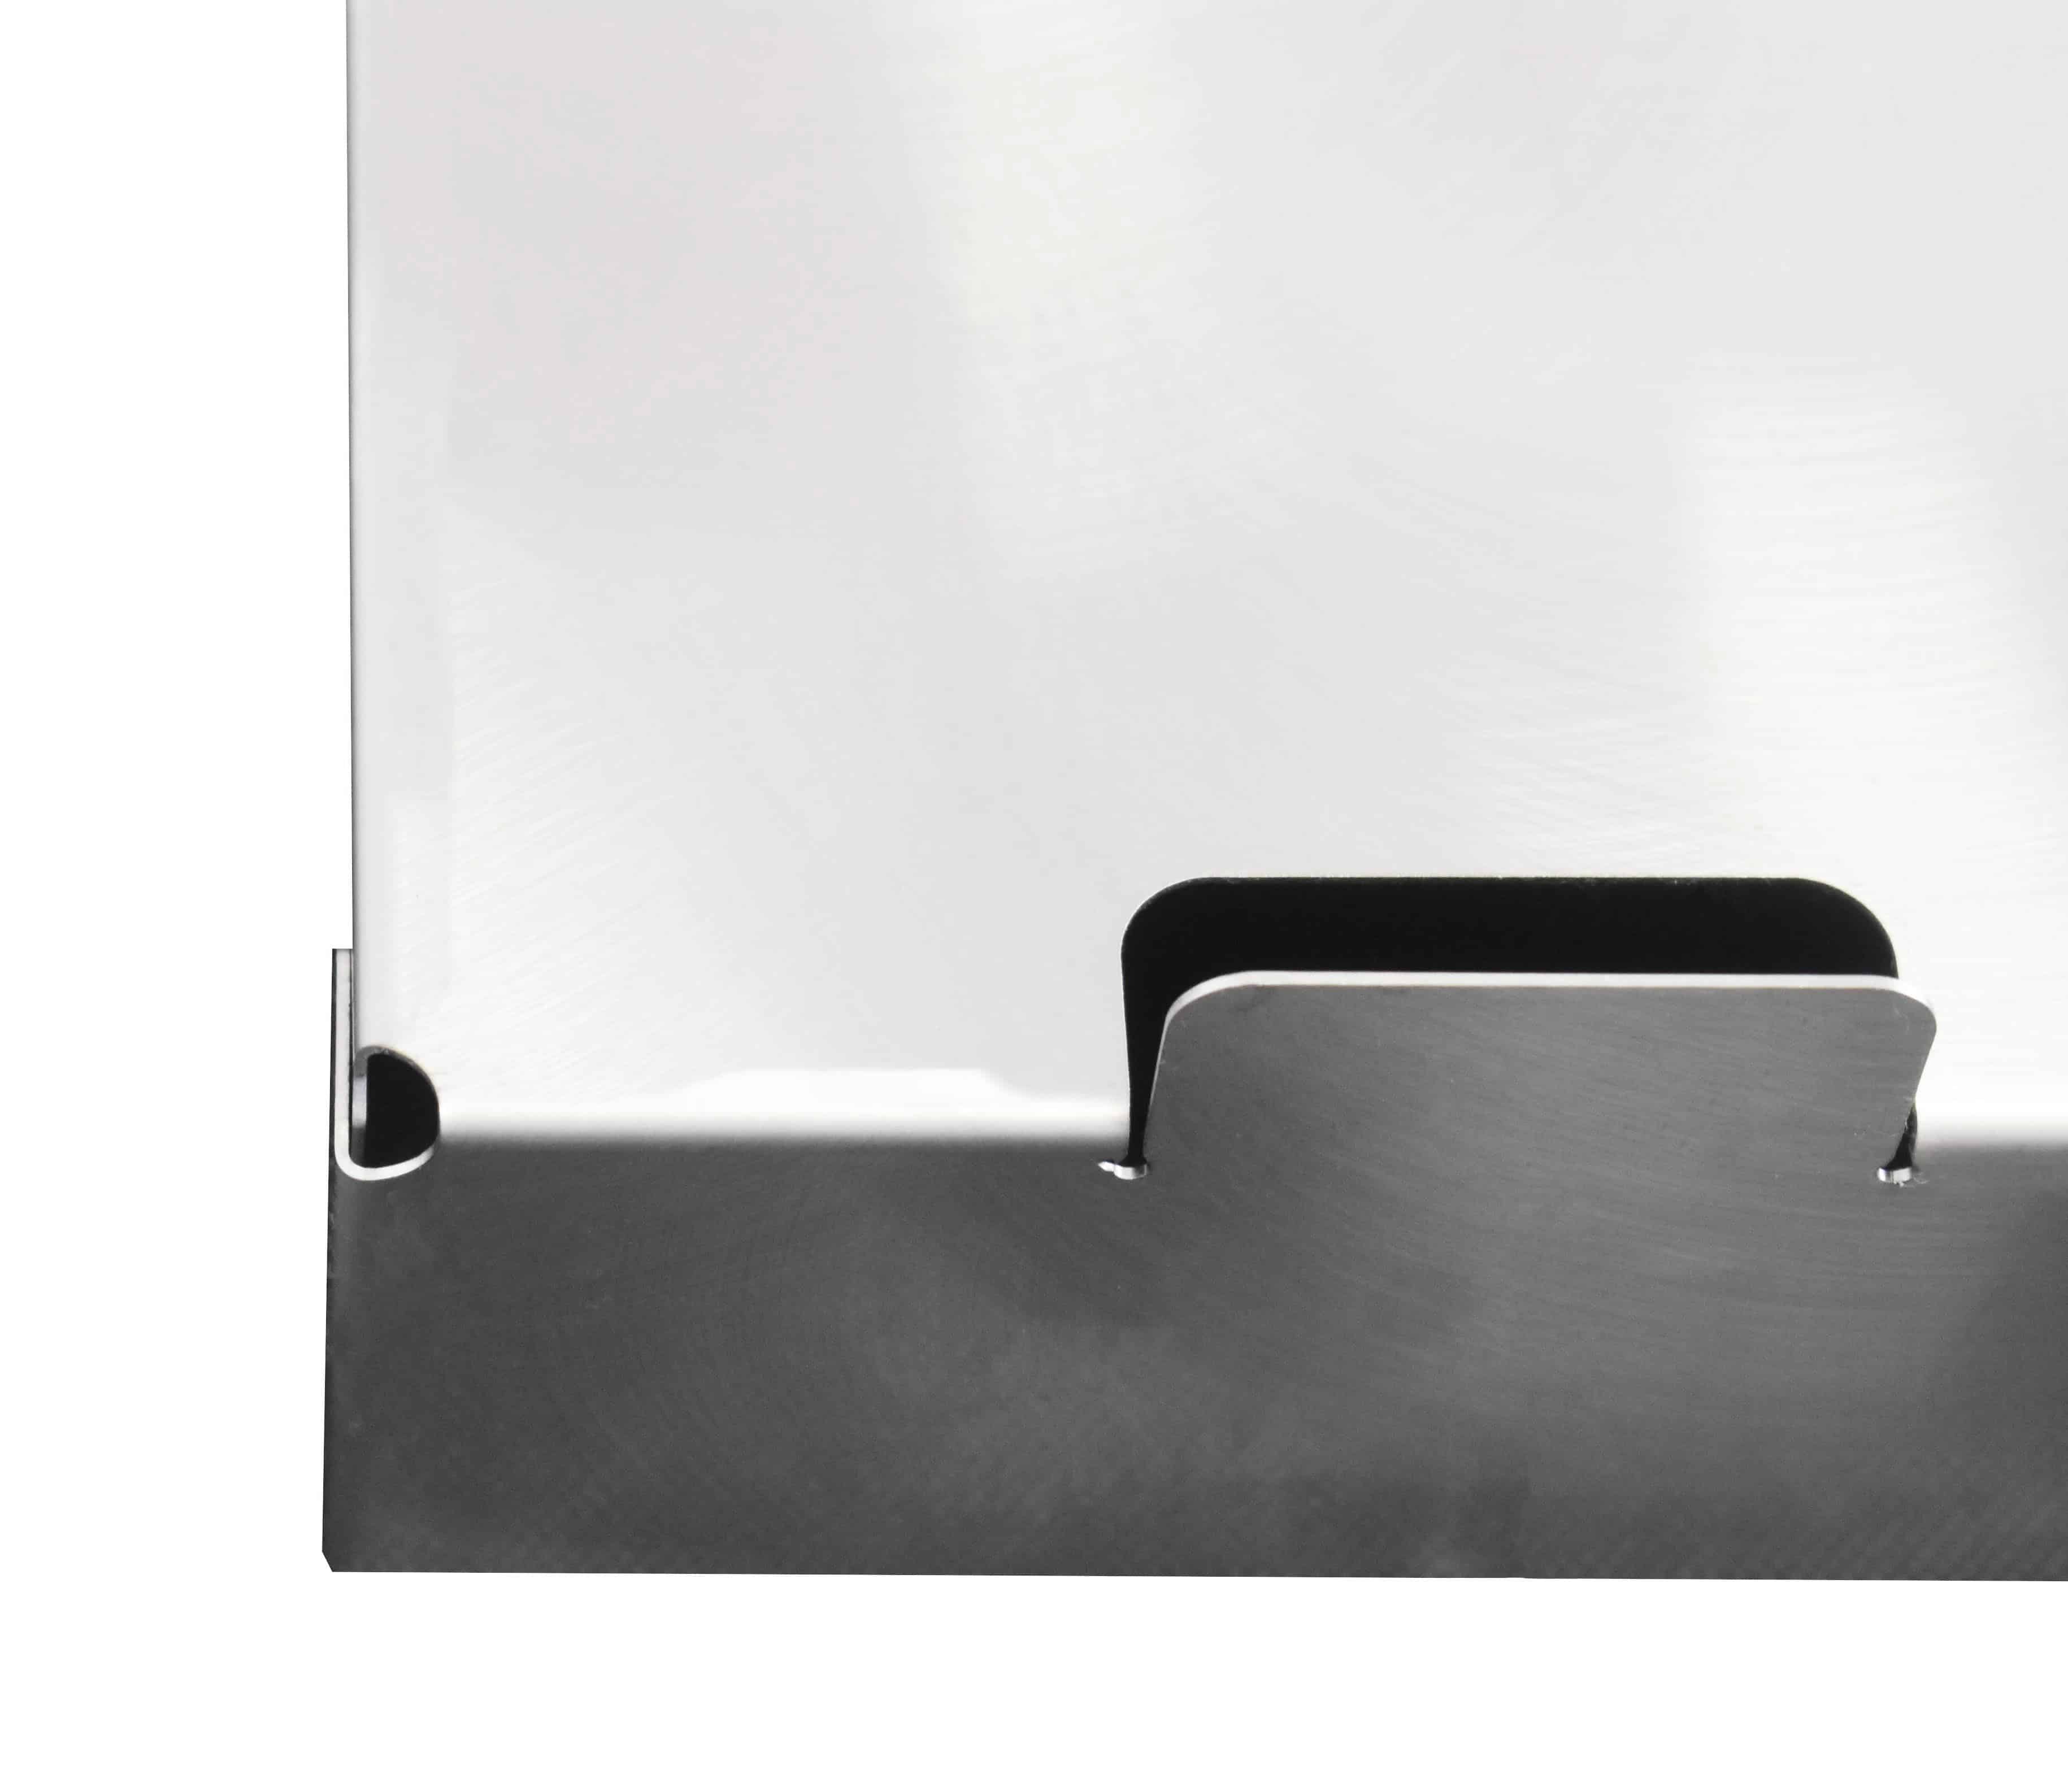 Stainless steel A4 document tray